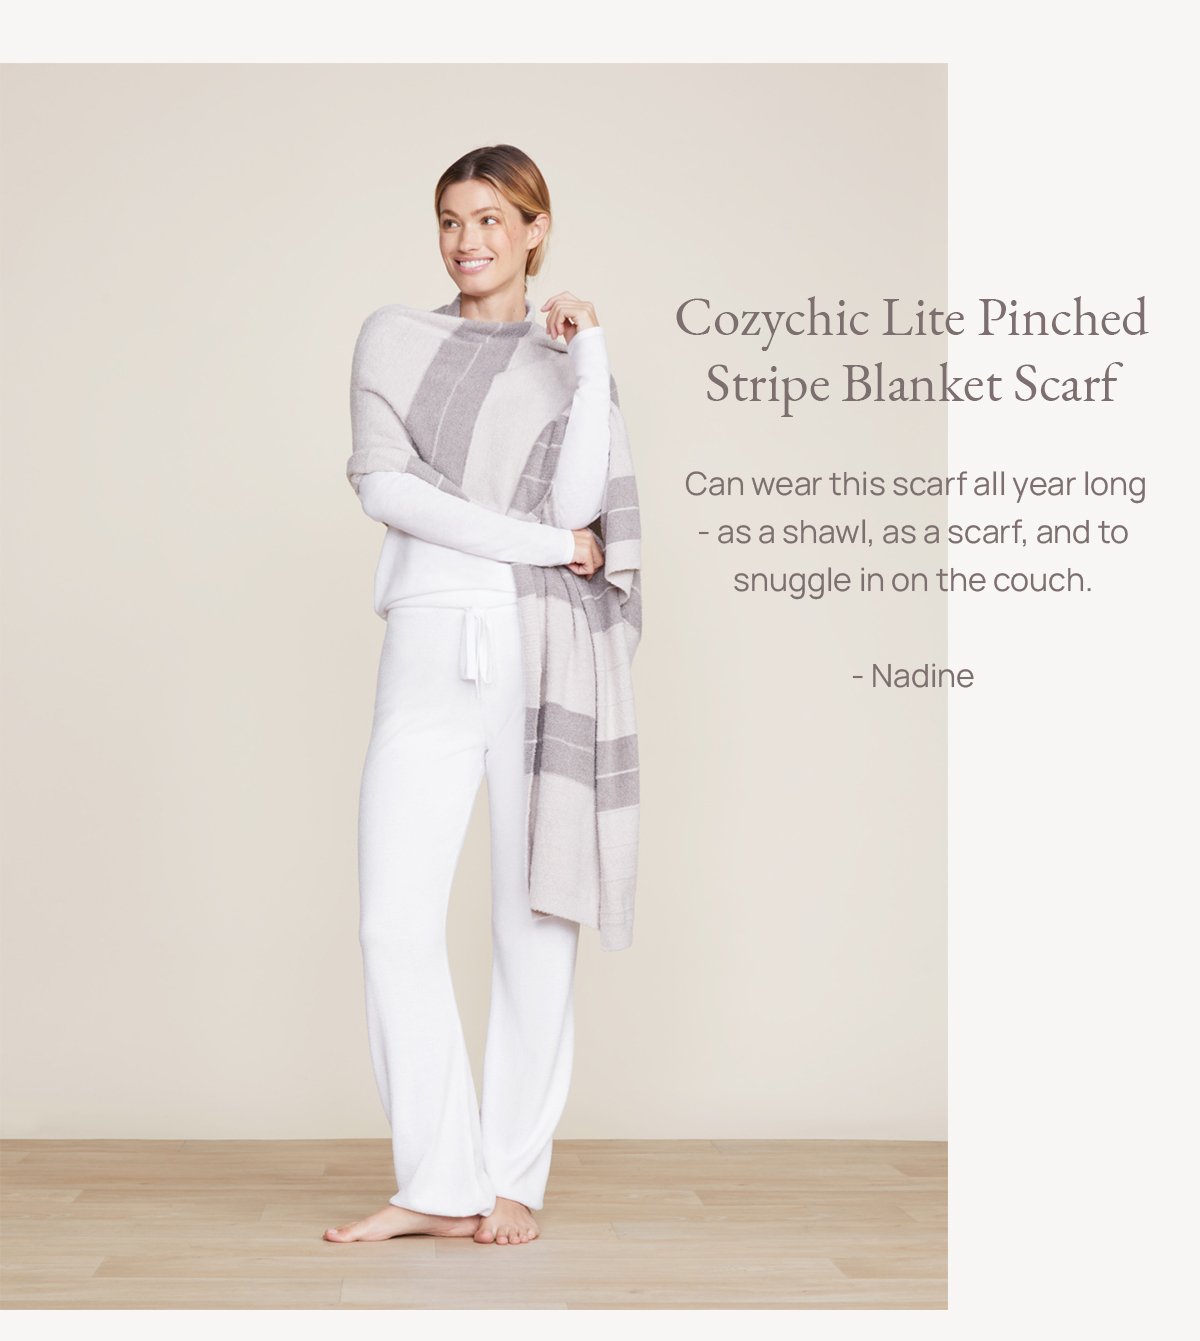 CCL Pinched Stripe Blanket Wrap: Can wear this scarf all year long - as a shawl, as a scarf, and to snuggle in on the couch. -Nadine